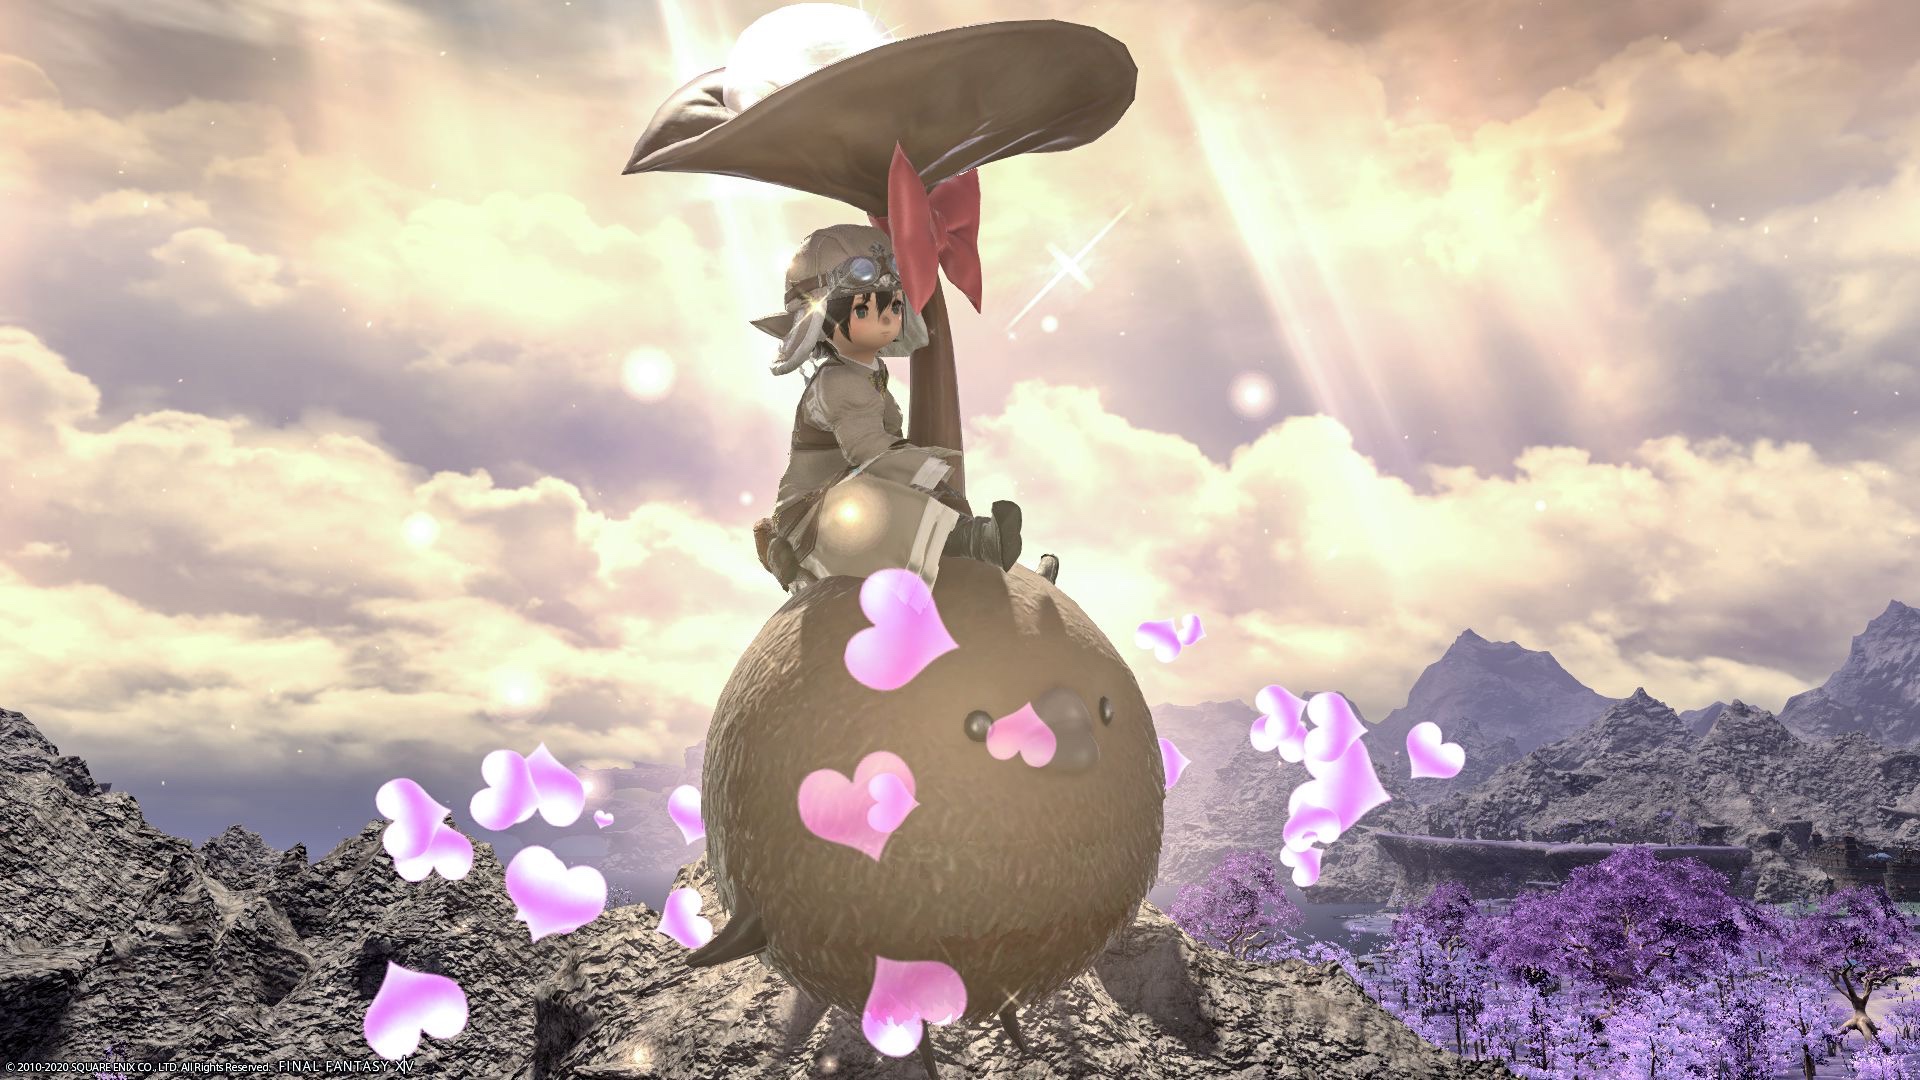 Final Fantasy XIV's Valentione's Day 2023 event brings some sweet